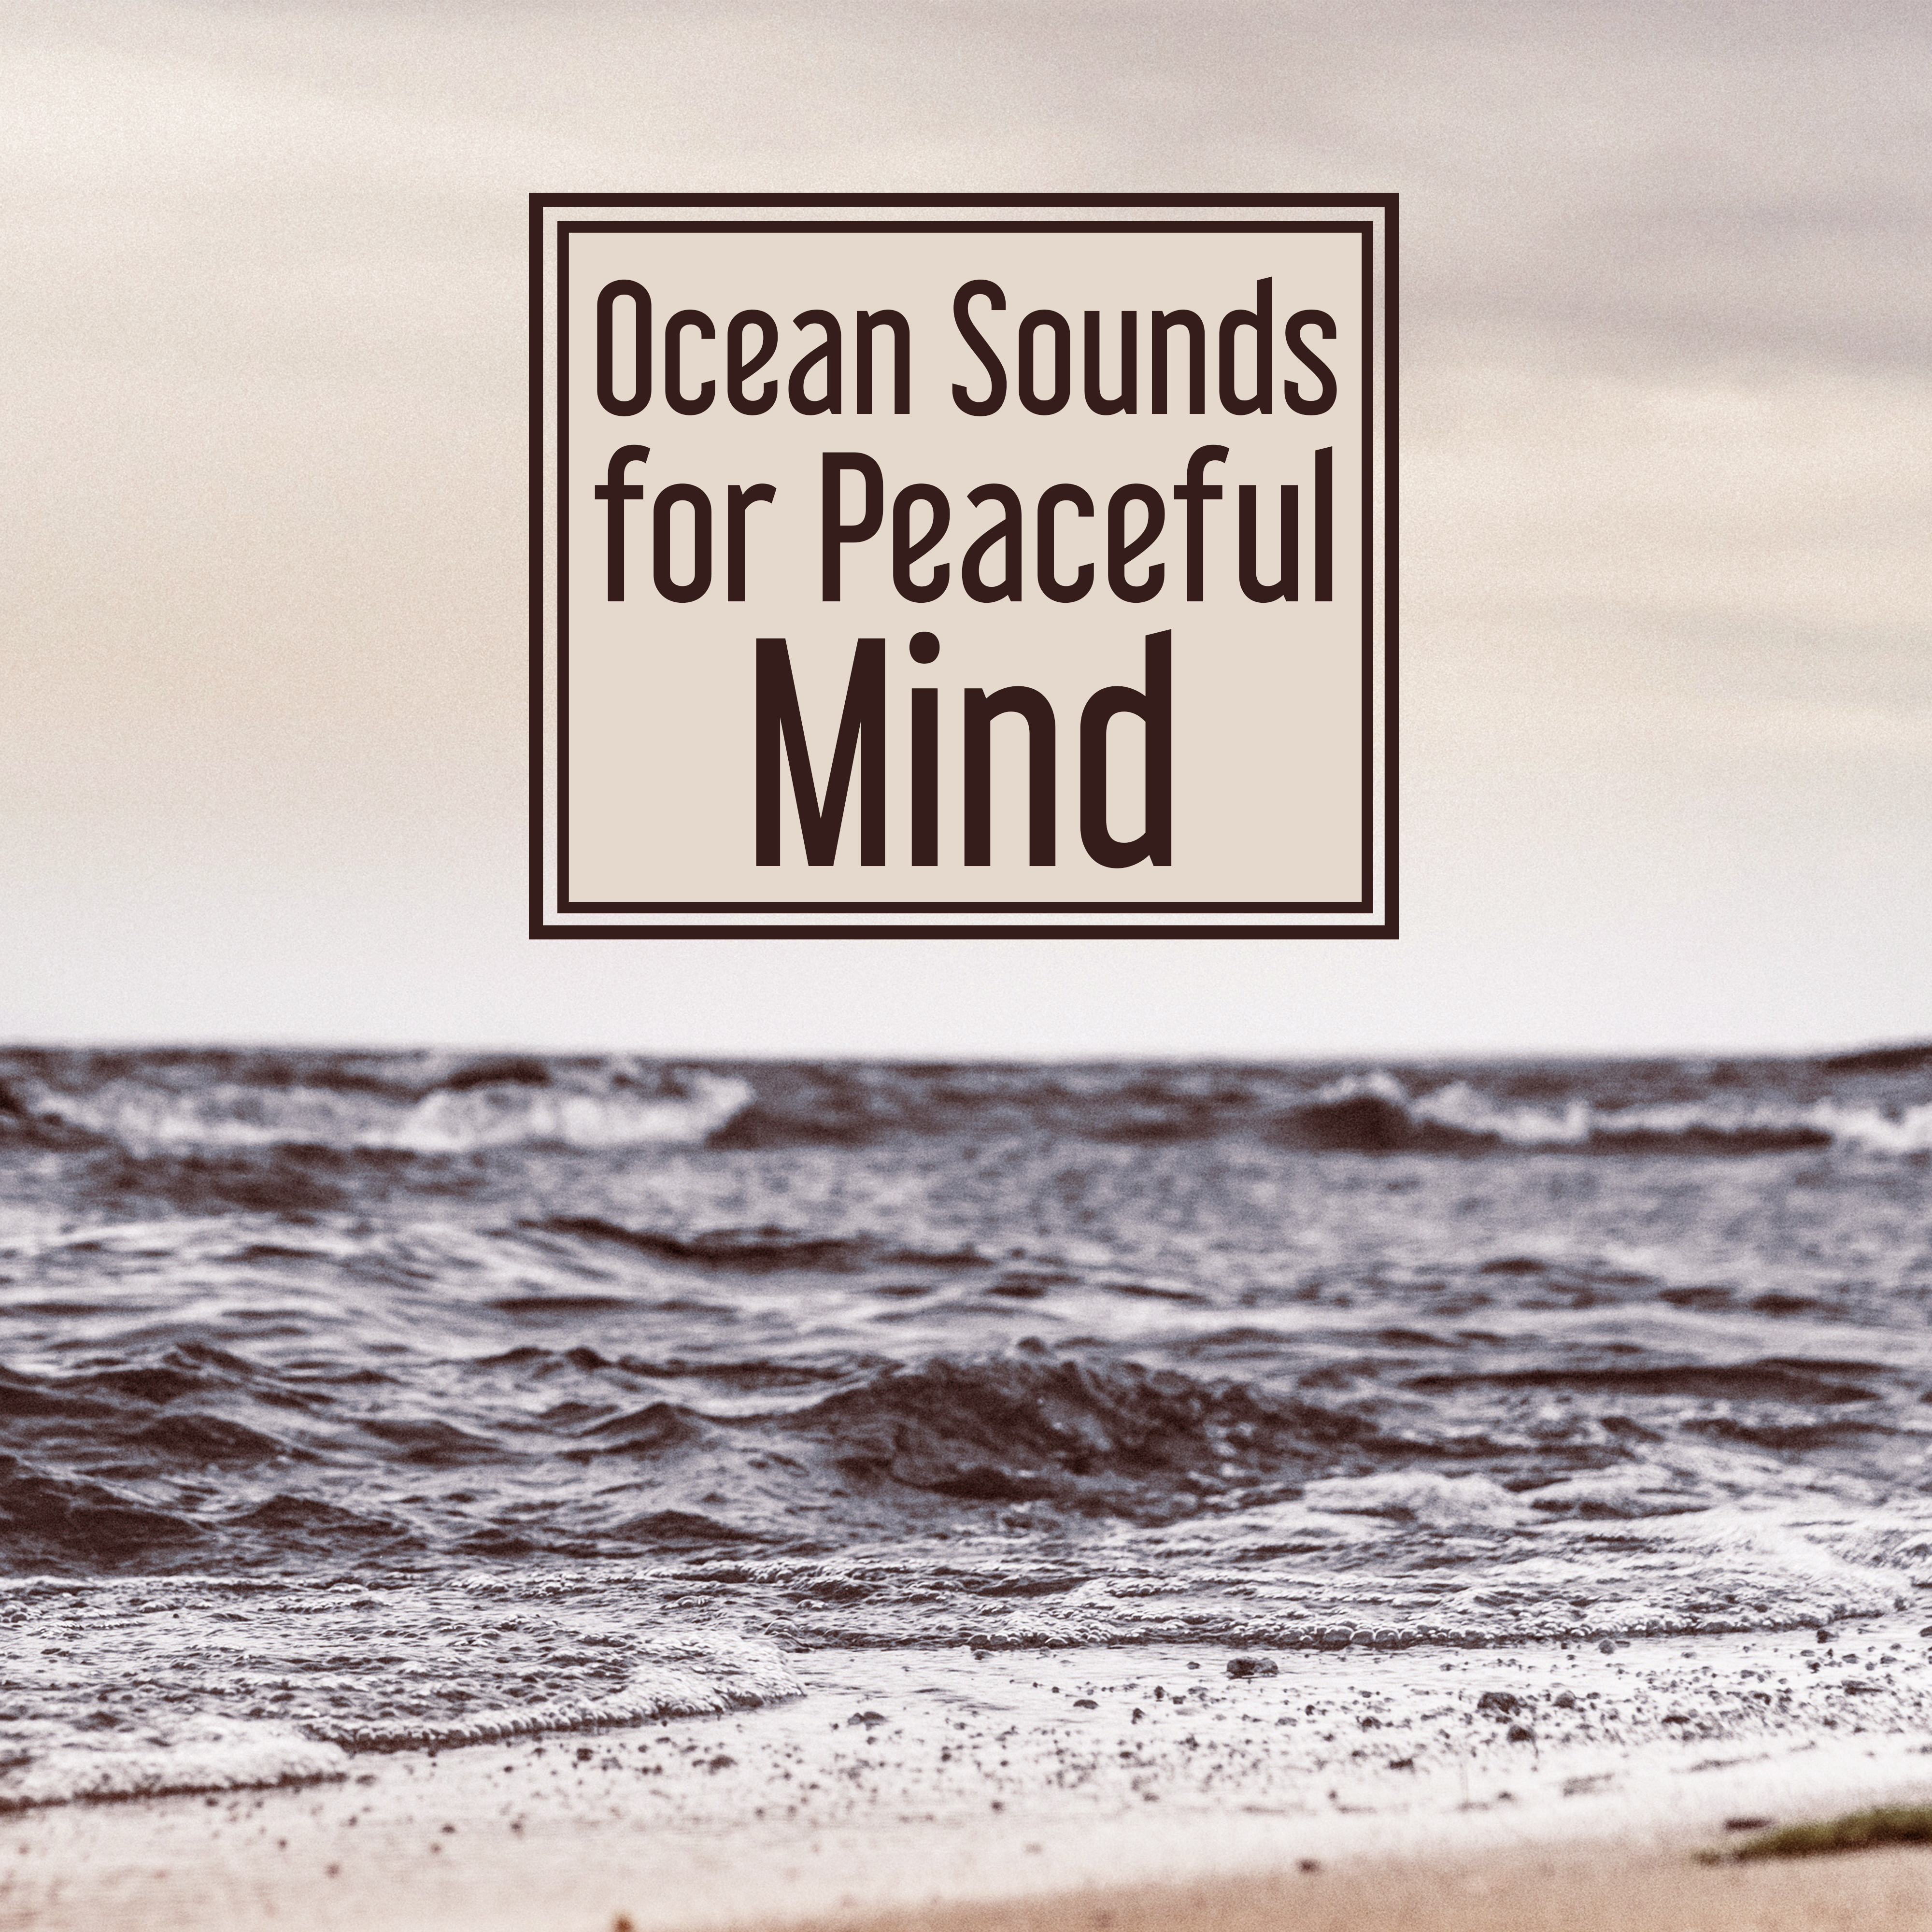 Ocean Sounds for Peaceful Mind  Stress Relief, Spirit Harmony, Beautiful Music, New Age Relaxation